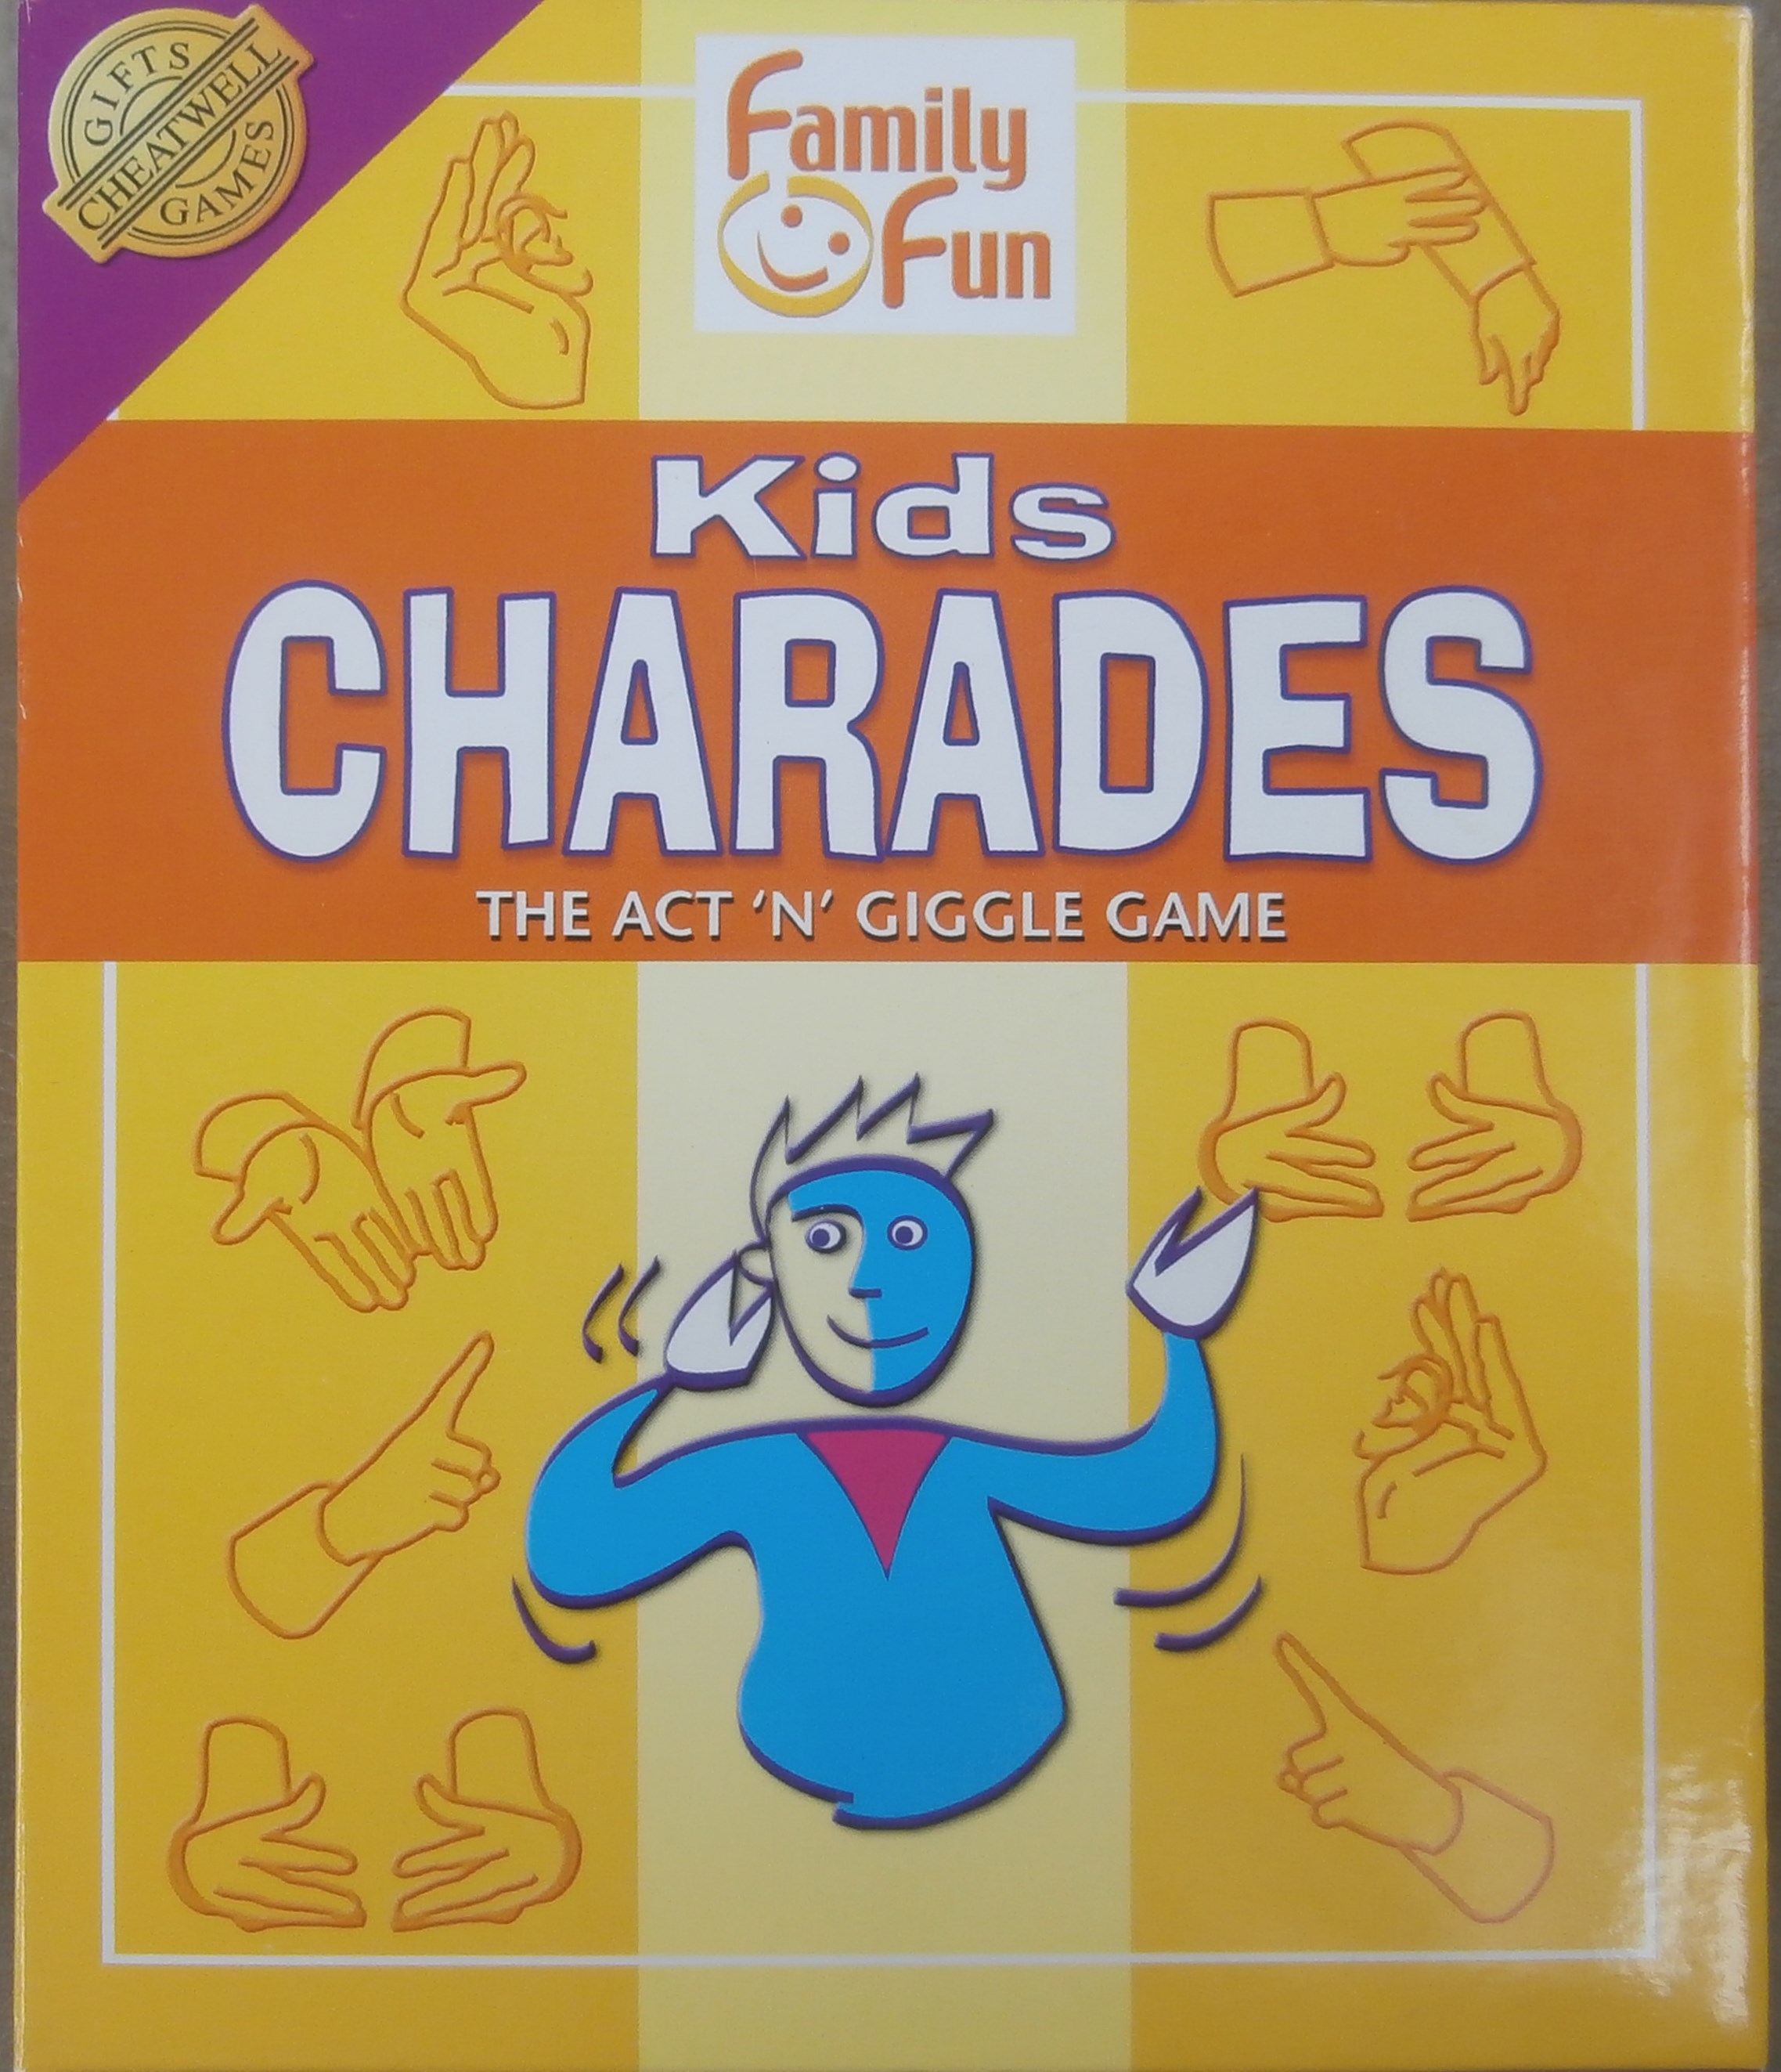 The Game of Kids Charades